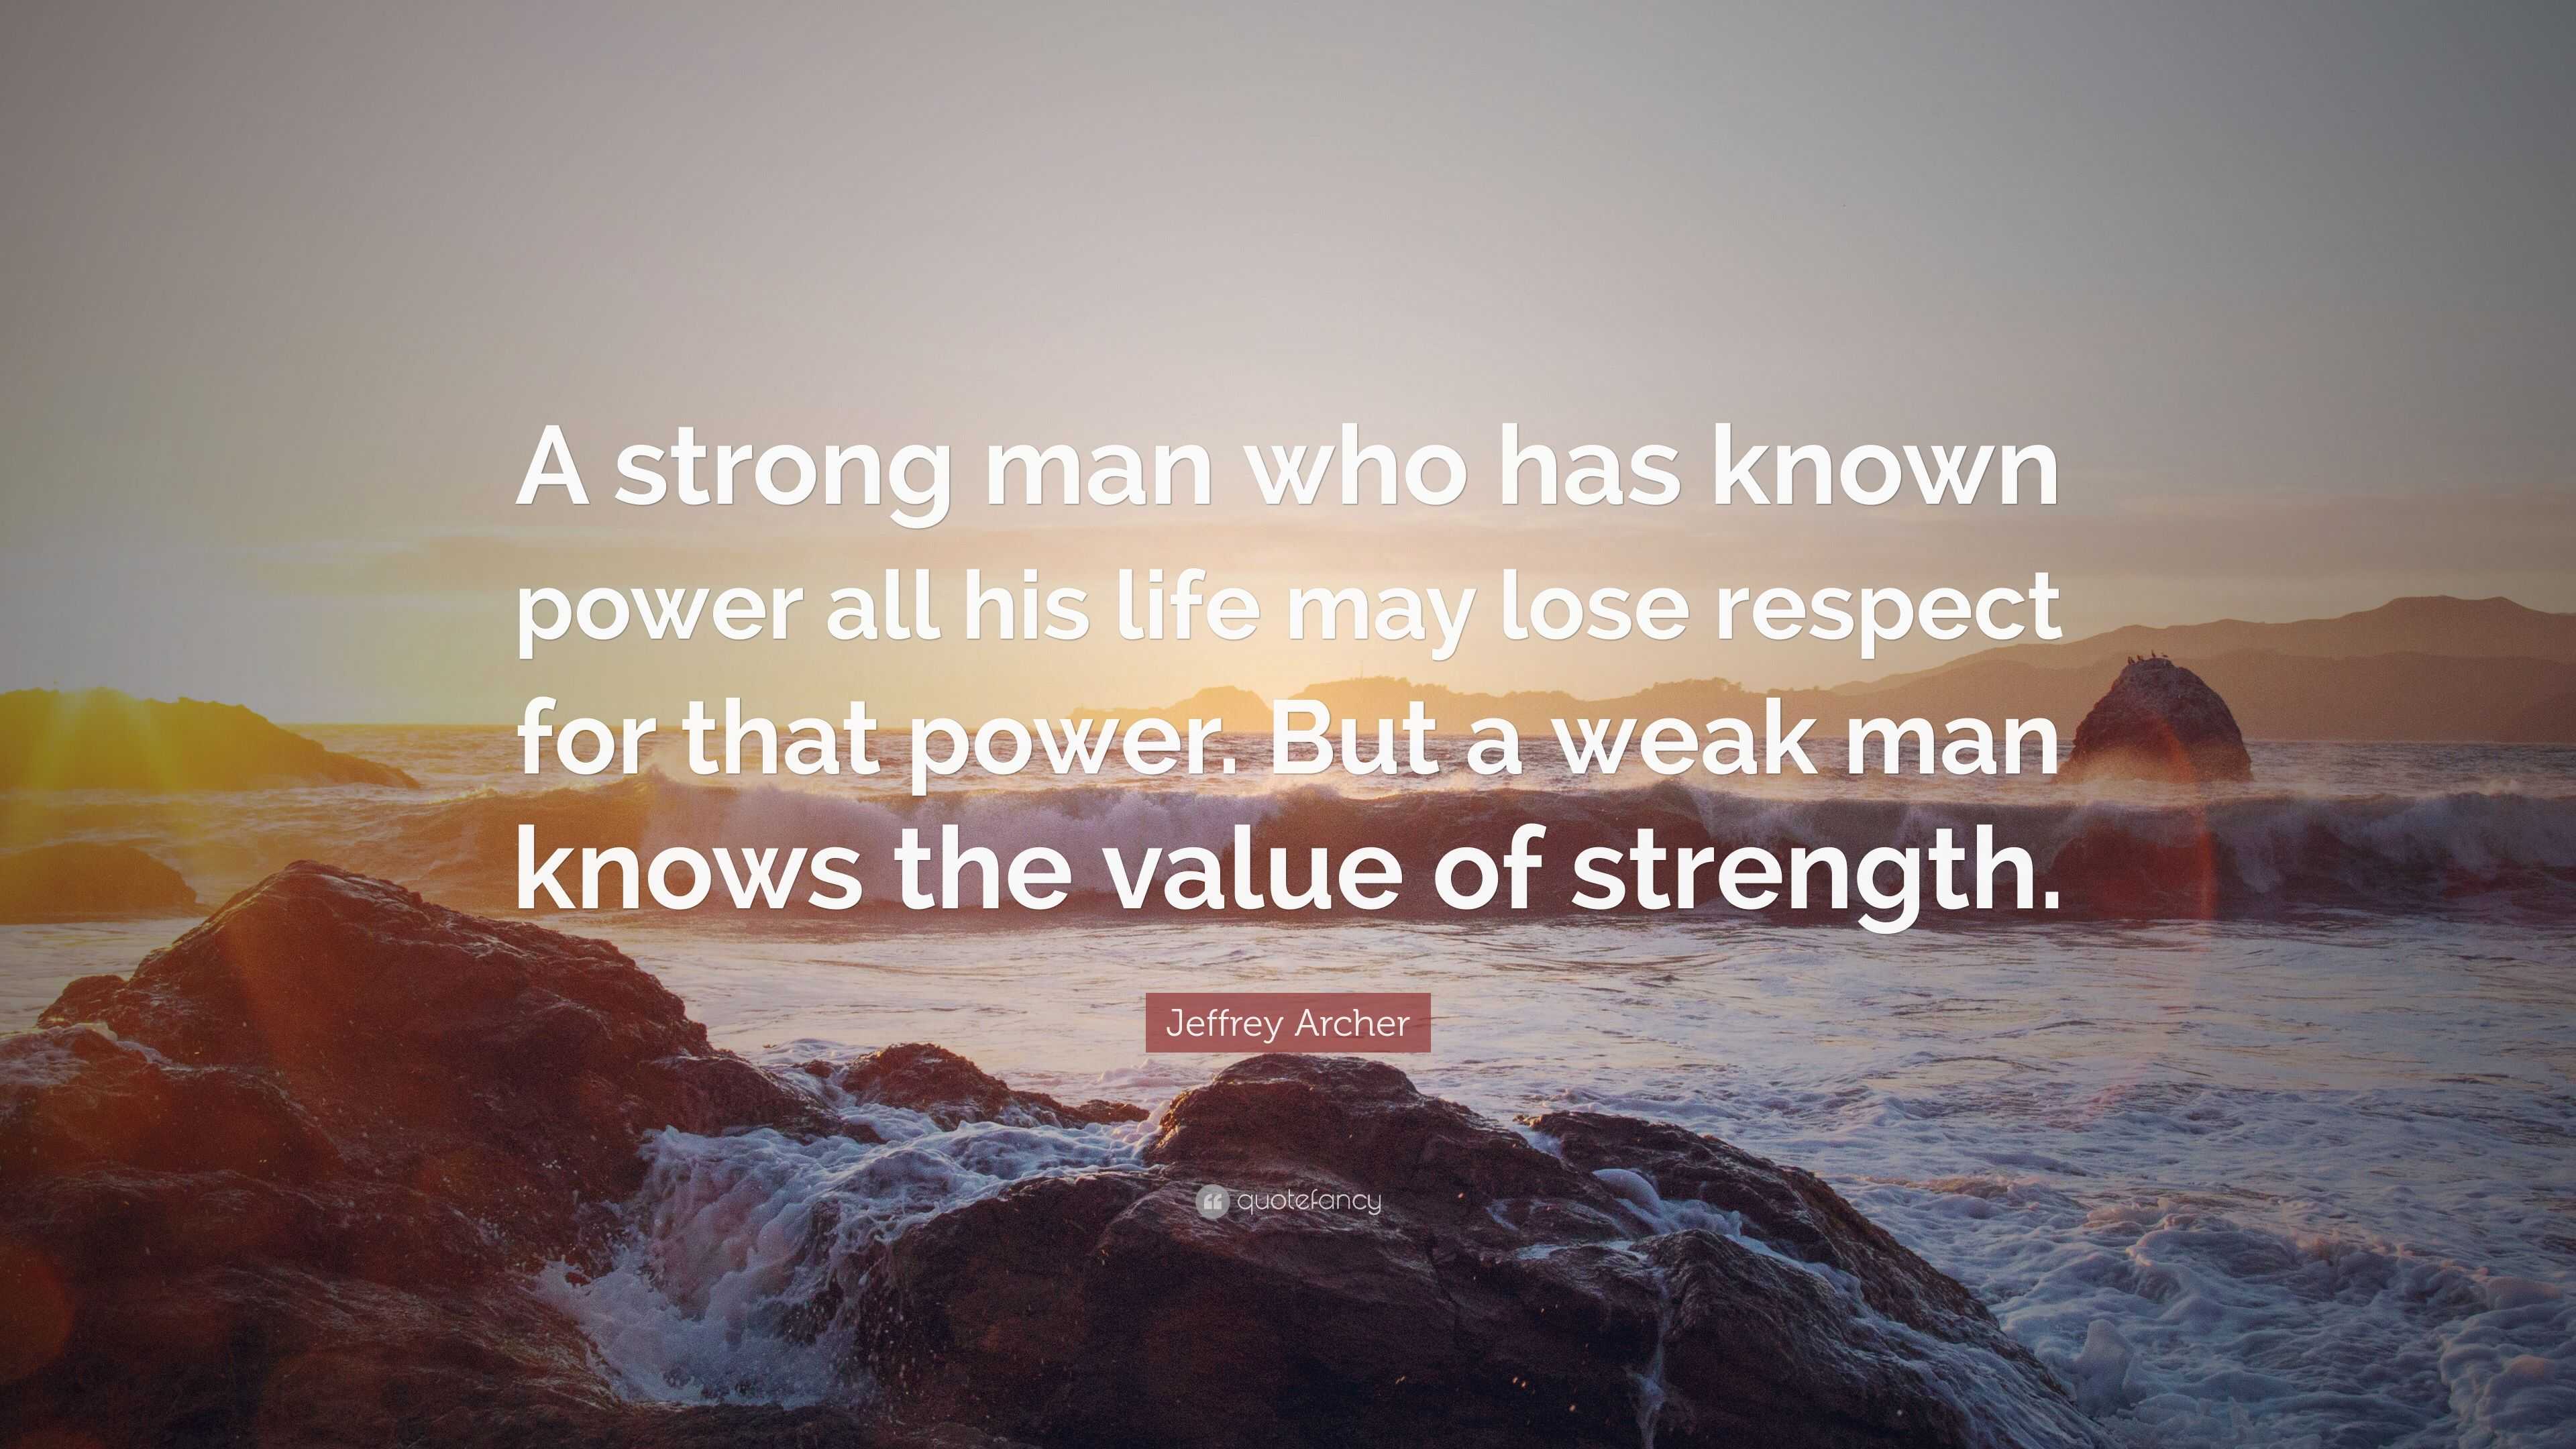 Jeffrey Archer Quote: “A strong man who has known power all his life ...